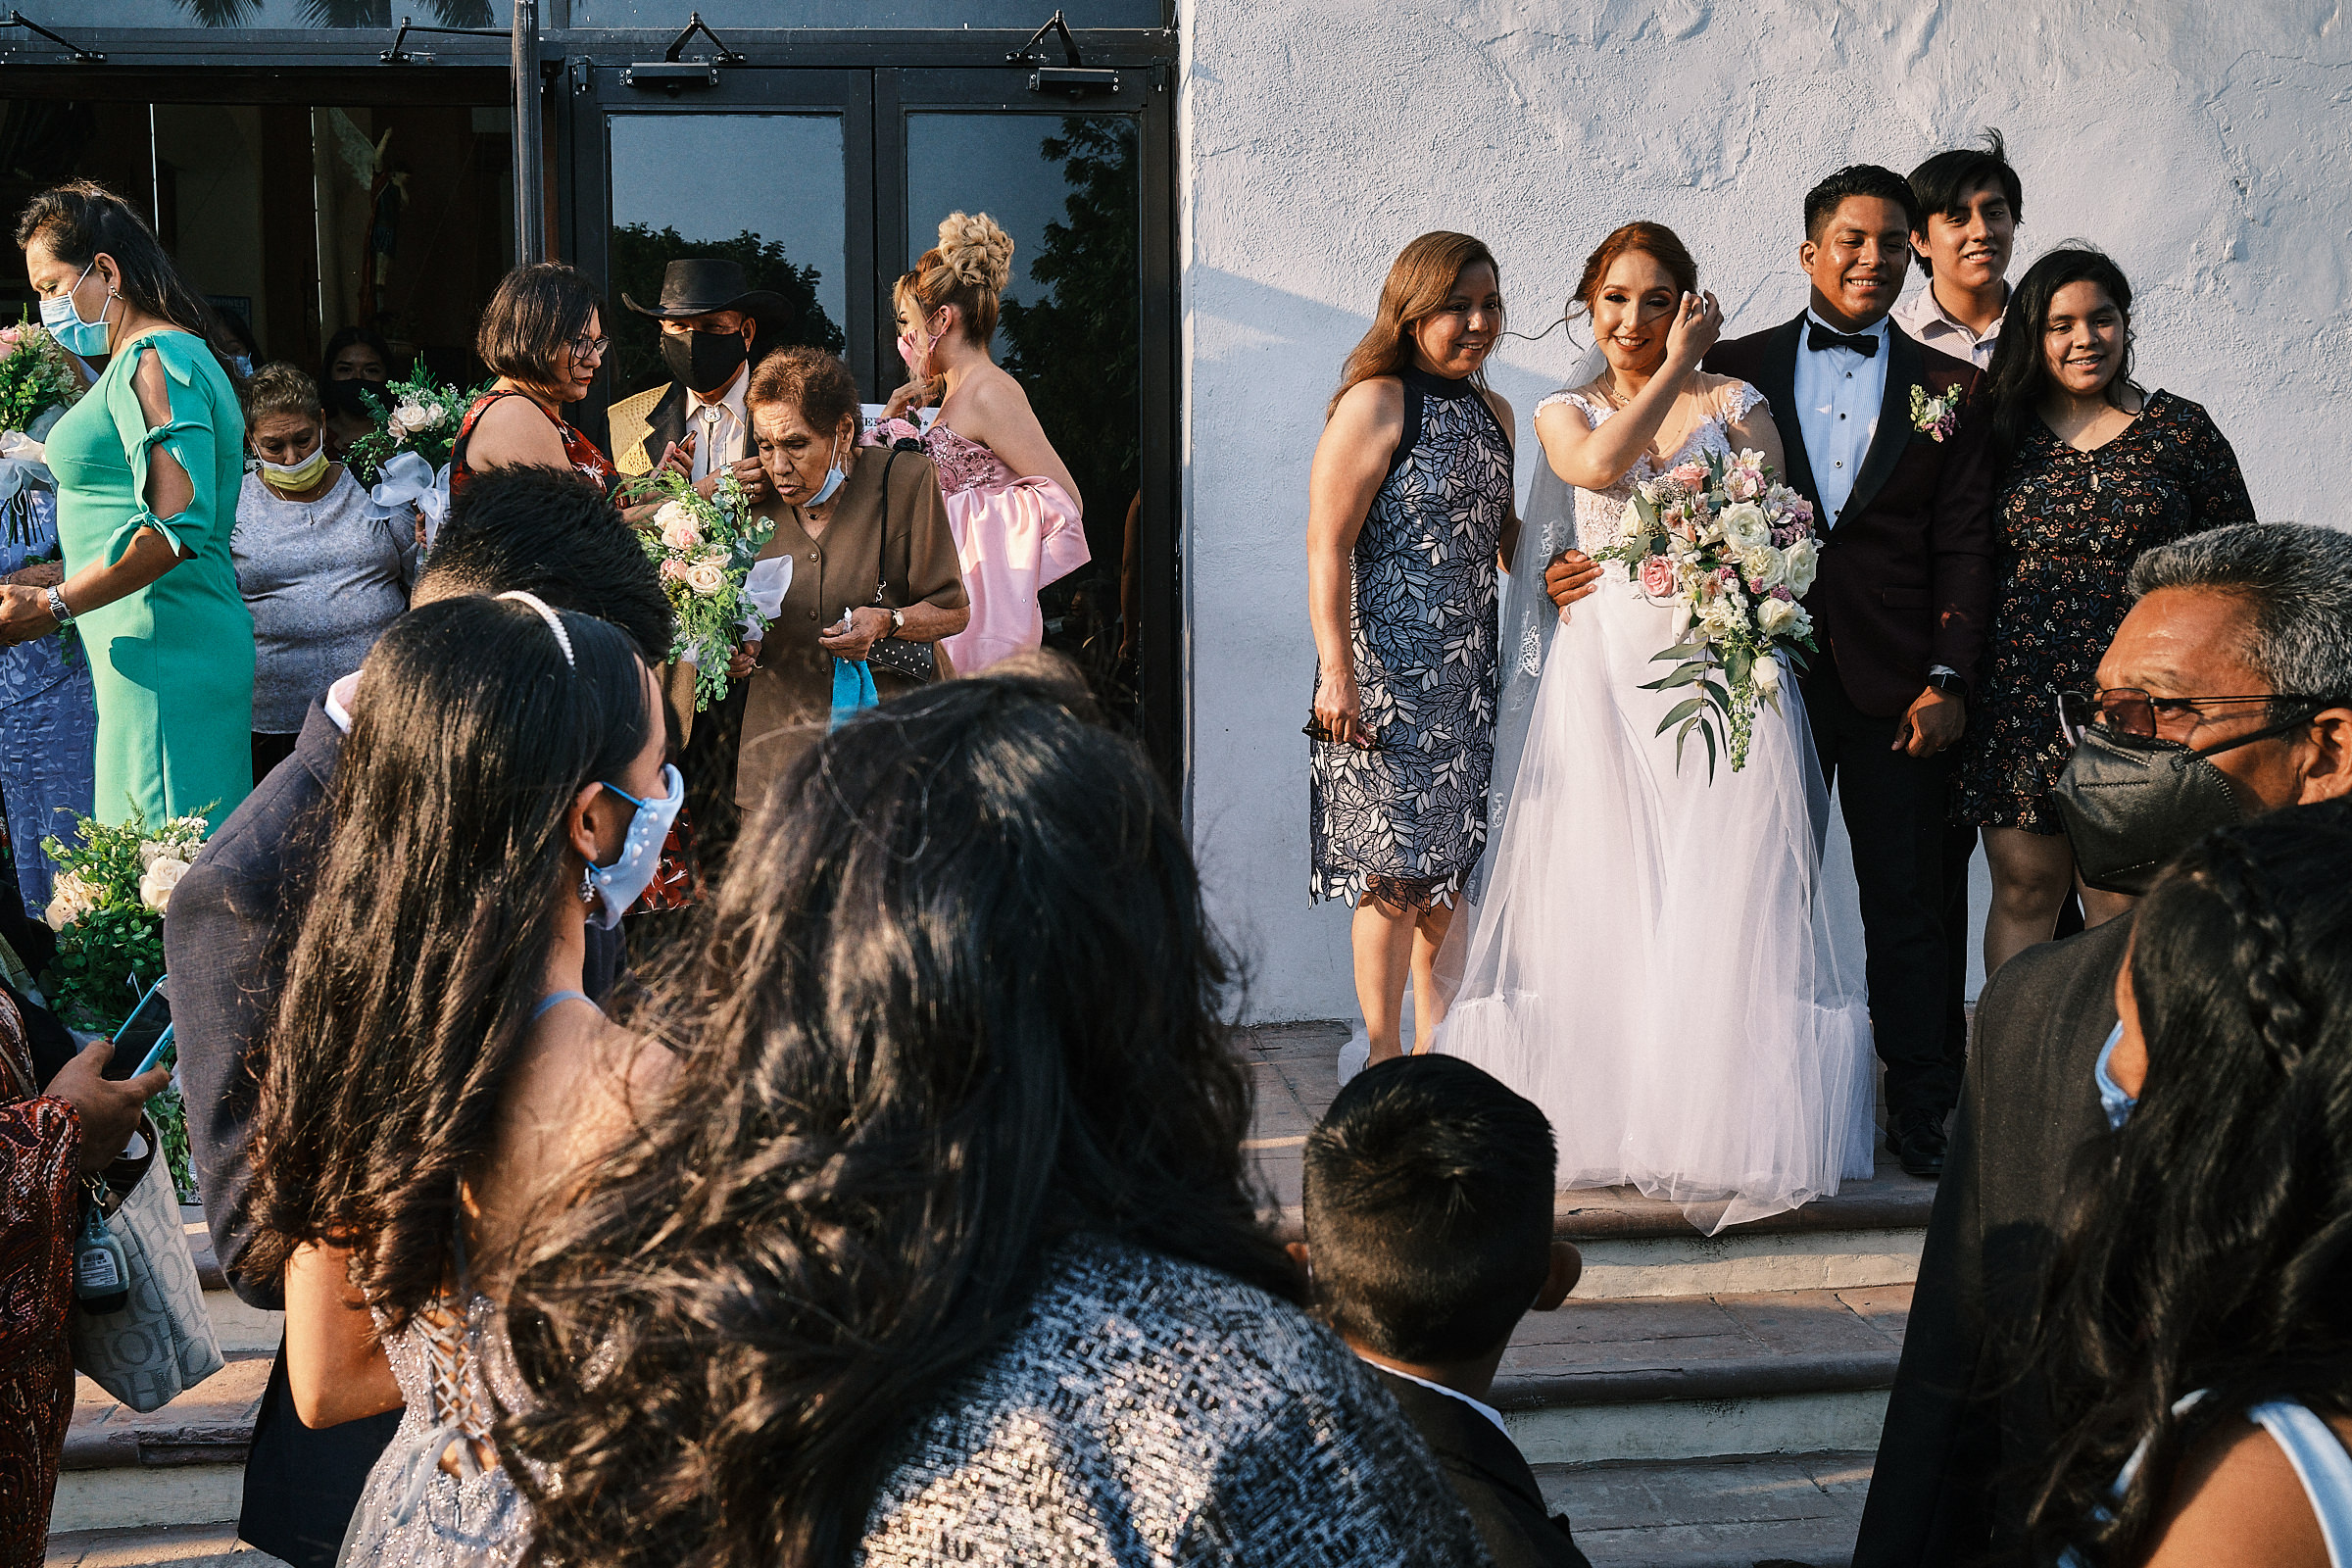 Bride And Groom Take Photos With Guests As Everyone Exits The Church In Altamira Mexico